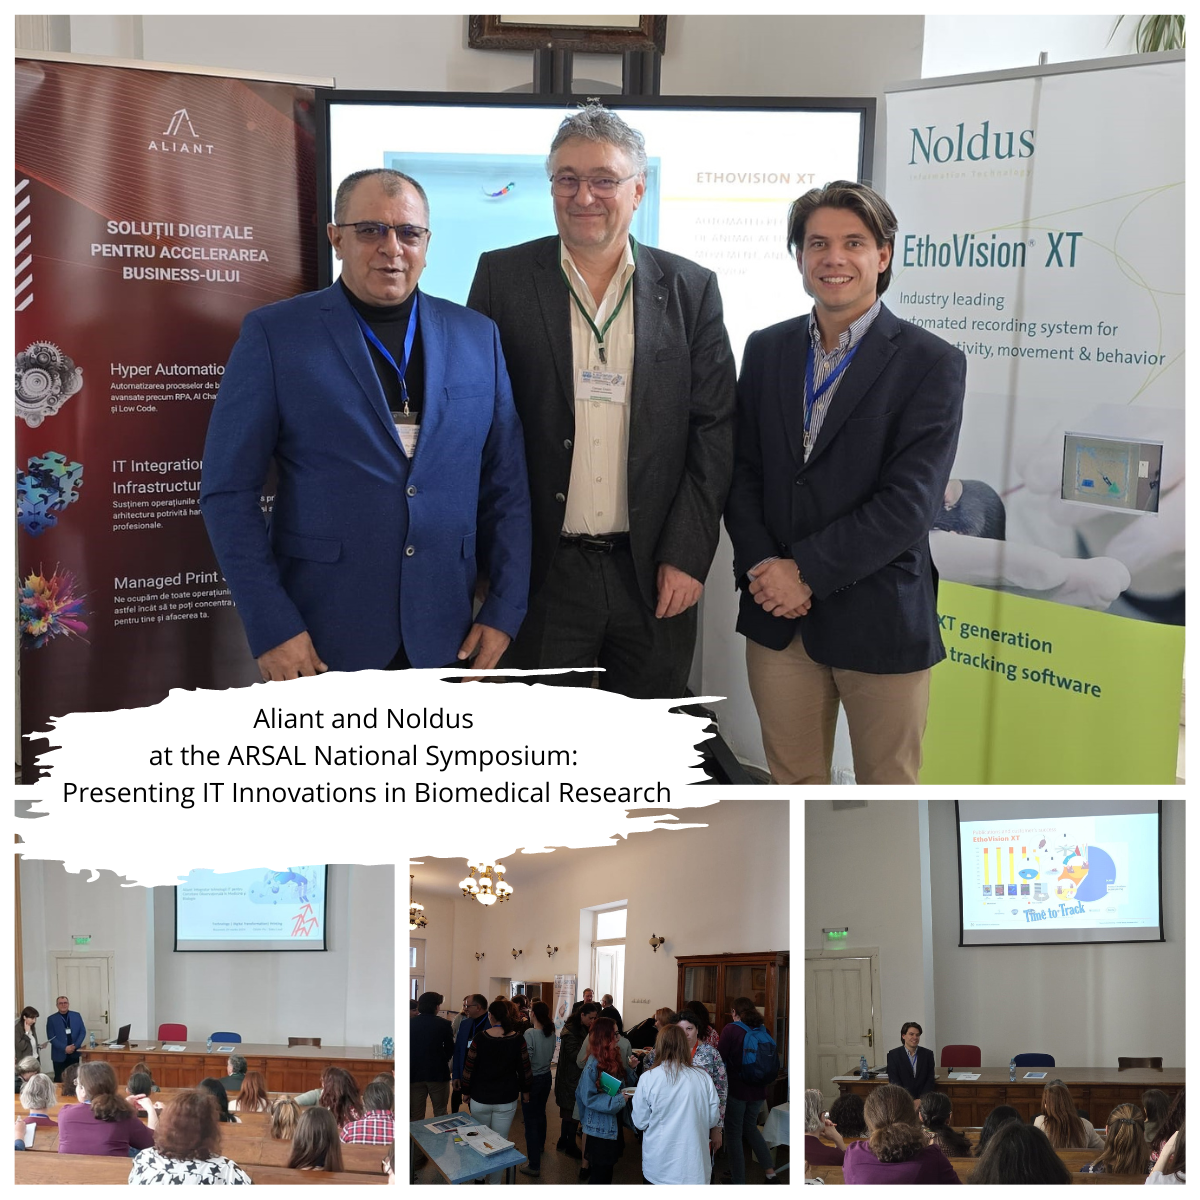 Aliant & Noldus unveil IT innovations in biomedical research at ARSAL Symposium. Catalin Piu & Tom Pudil showcase AI's role in advancing research, elevating Romania's scientific prowess. Hosted by 